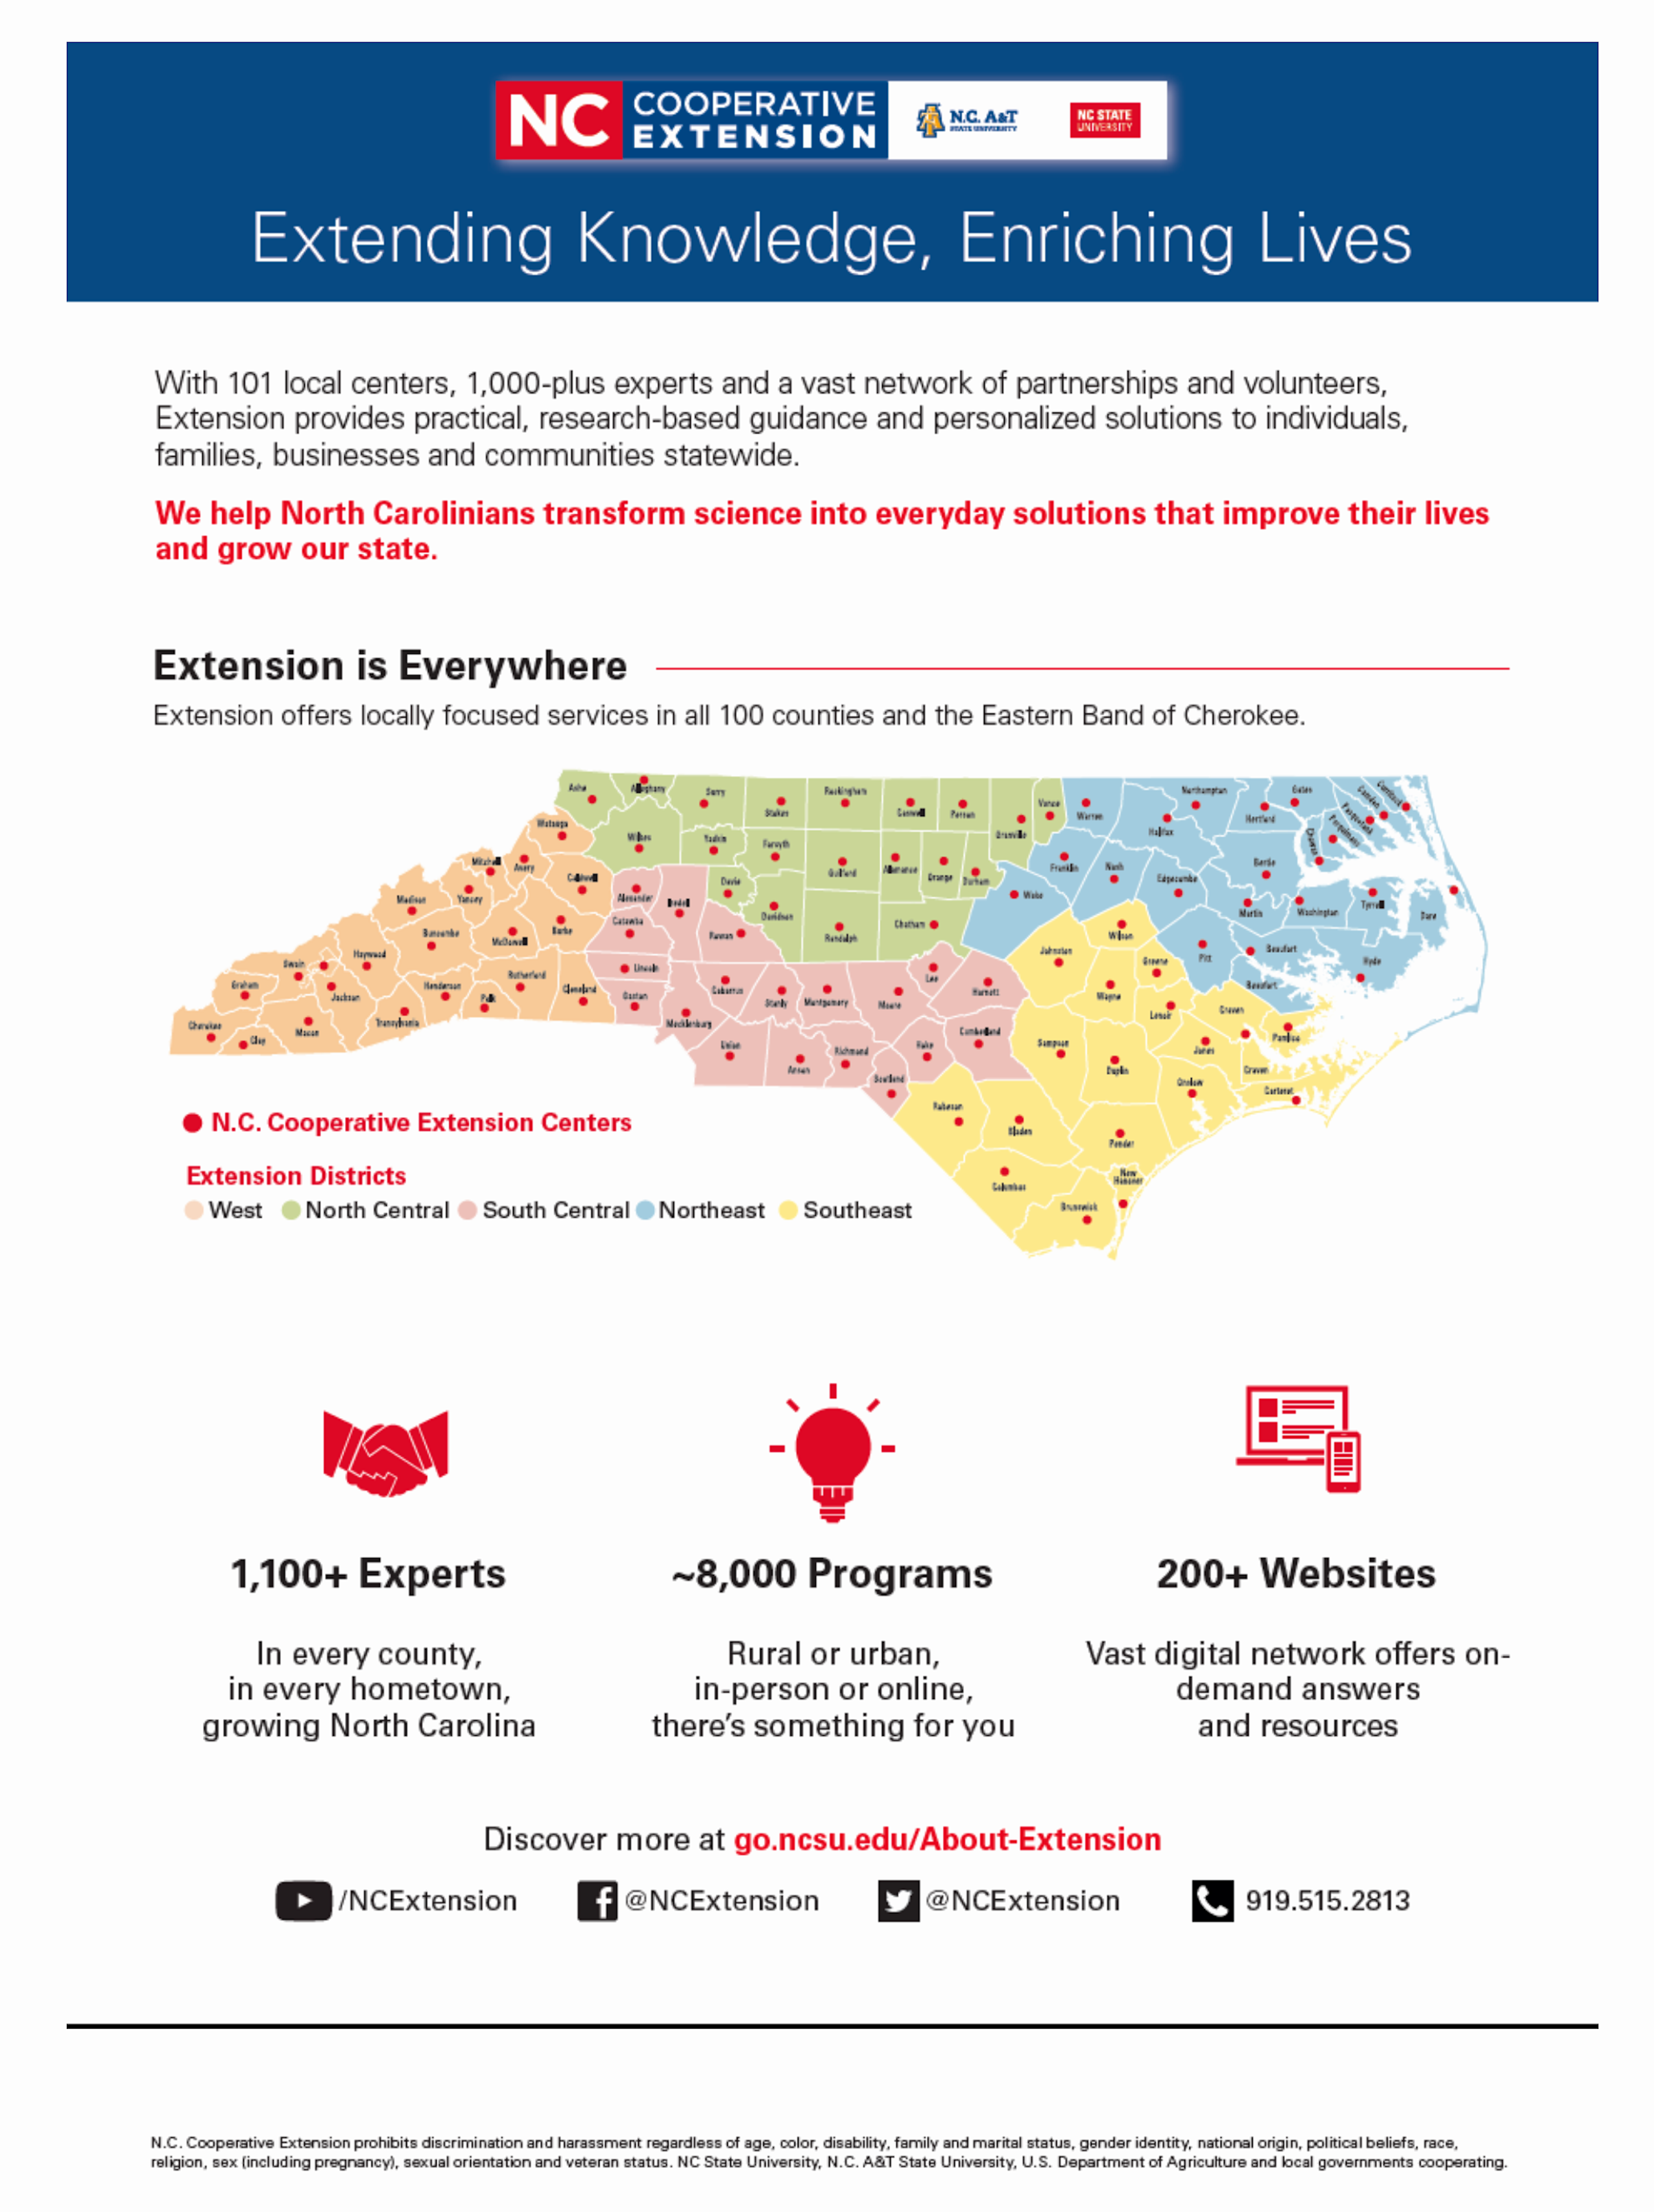 N.C. 2024 Local Impacts flyer page 2 N.C. Cooperative Extending Knowledge Enriching Lives, map of NC with Extension Centers and Districts and program statisticslabeled